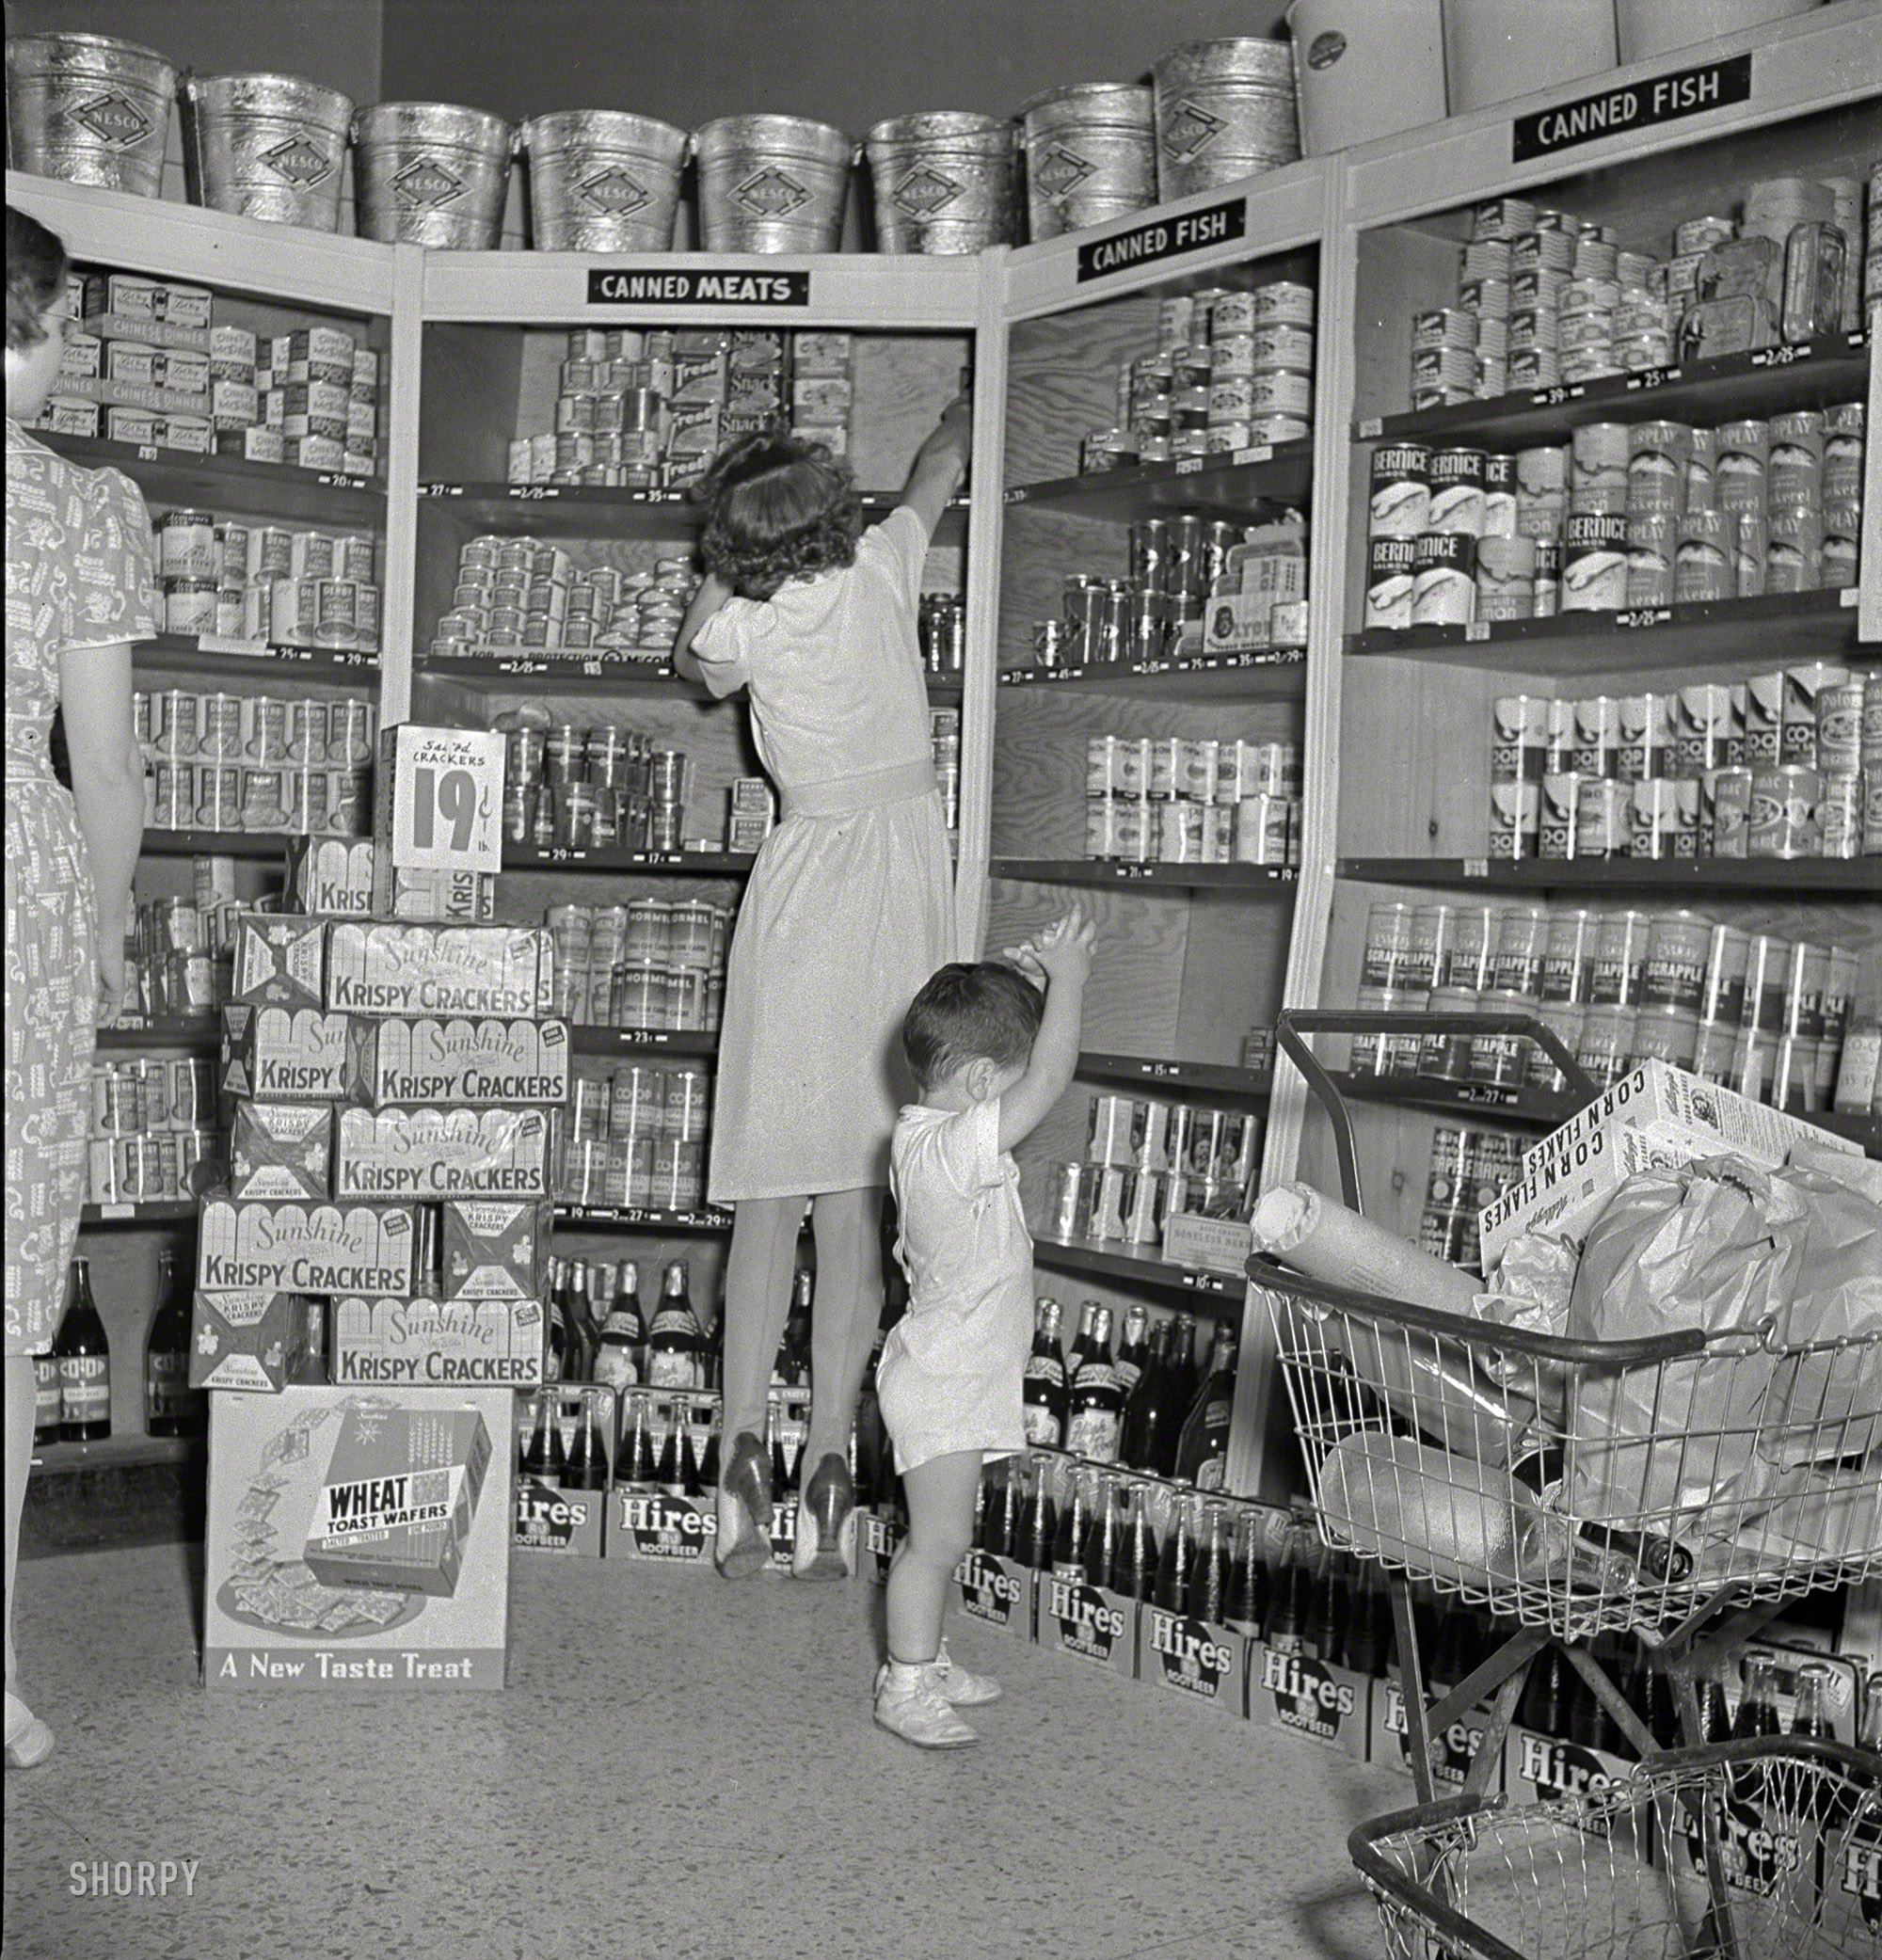 May 1942. "Greenbelt, Maryland. Federal housing project. Shopping in the cooperative grocery store." Hunting for that last can of Spam. Photo by Marjory Collins for the Resettlement Administration. View full size.